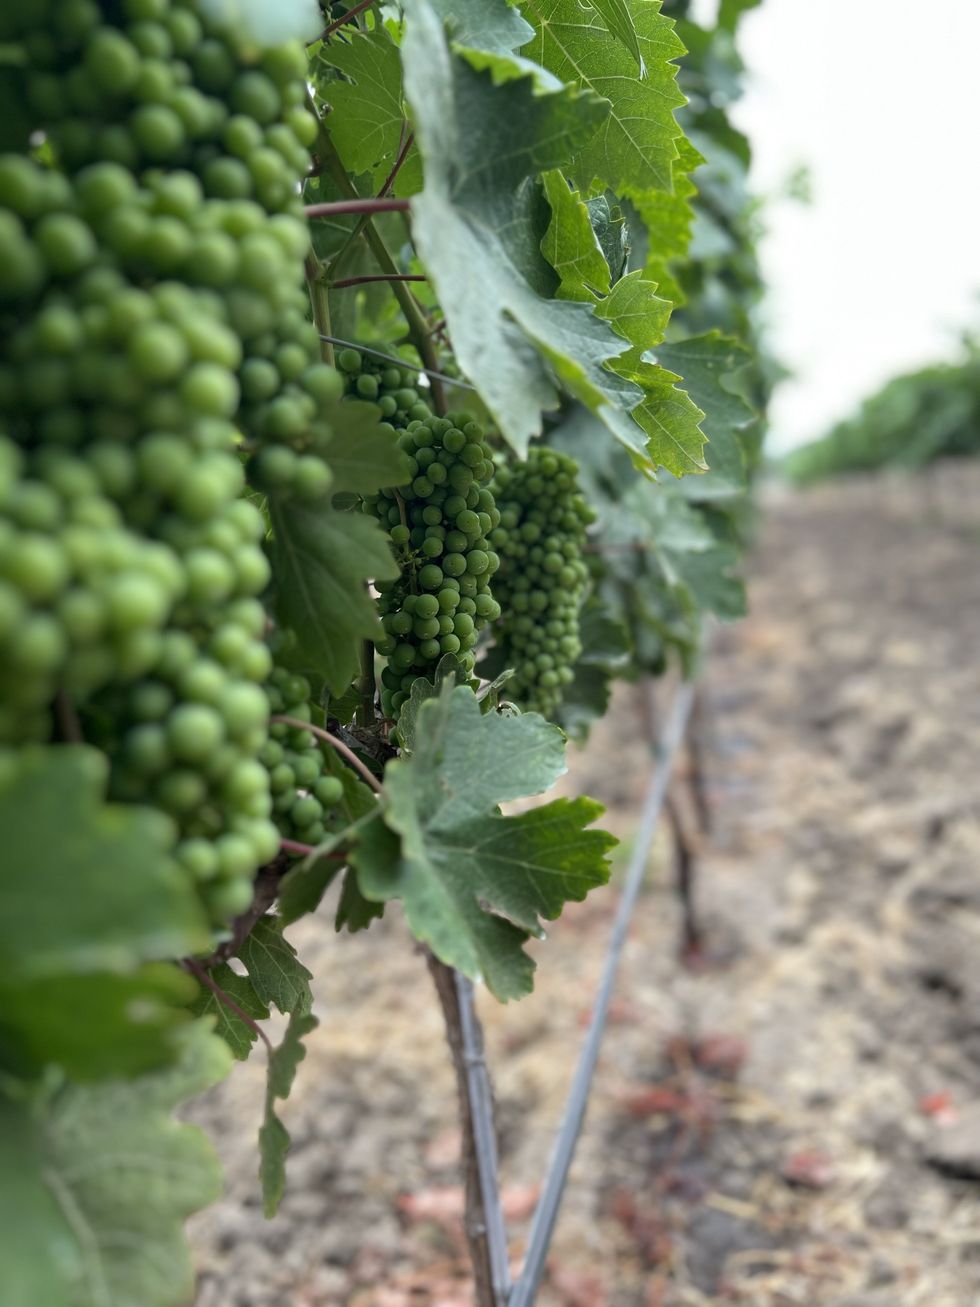 Wine grapes growing